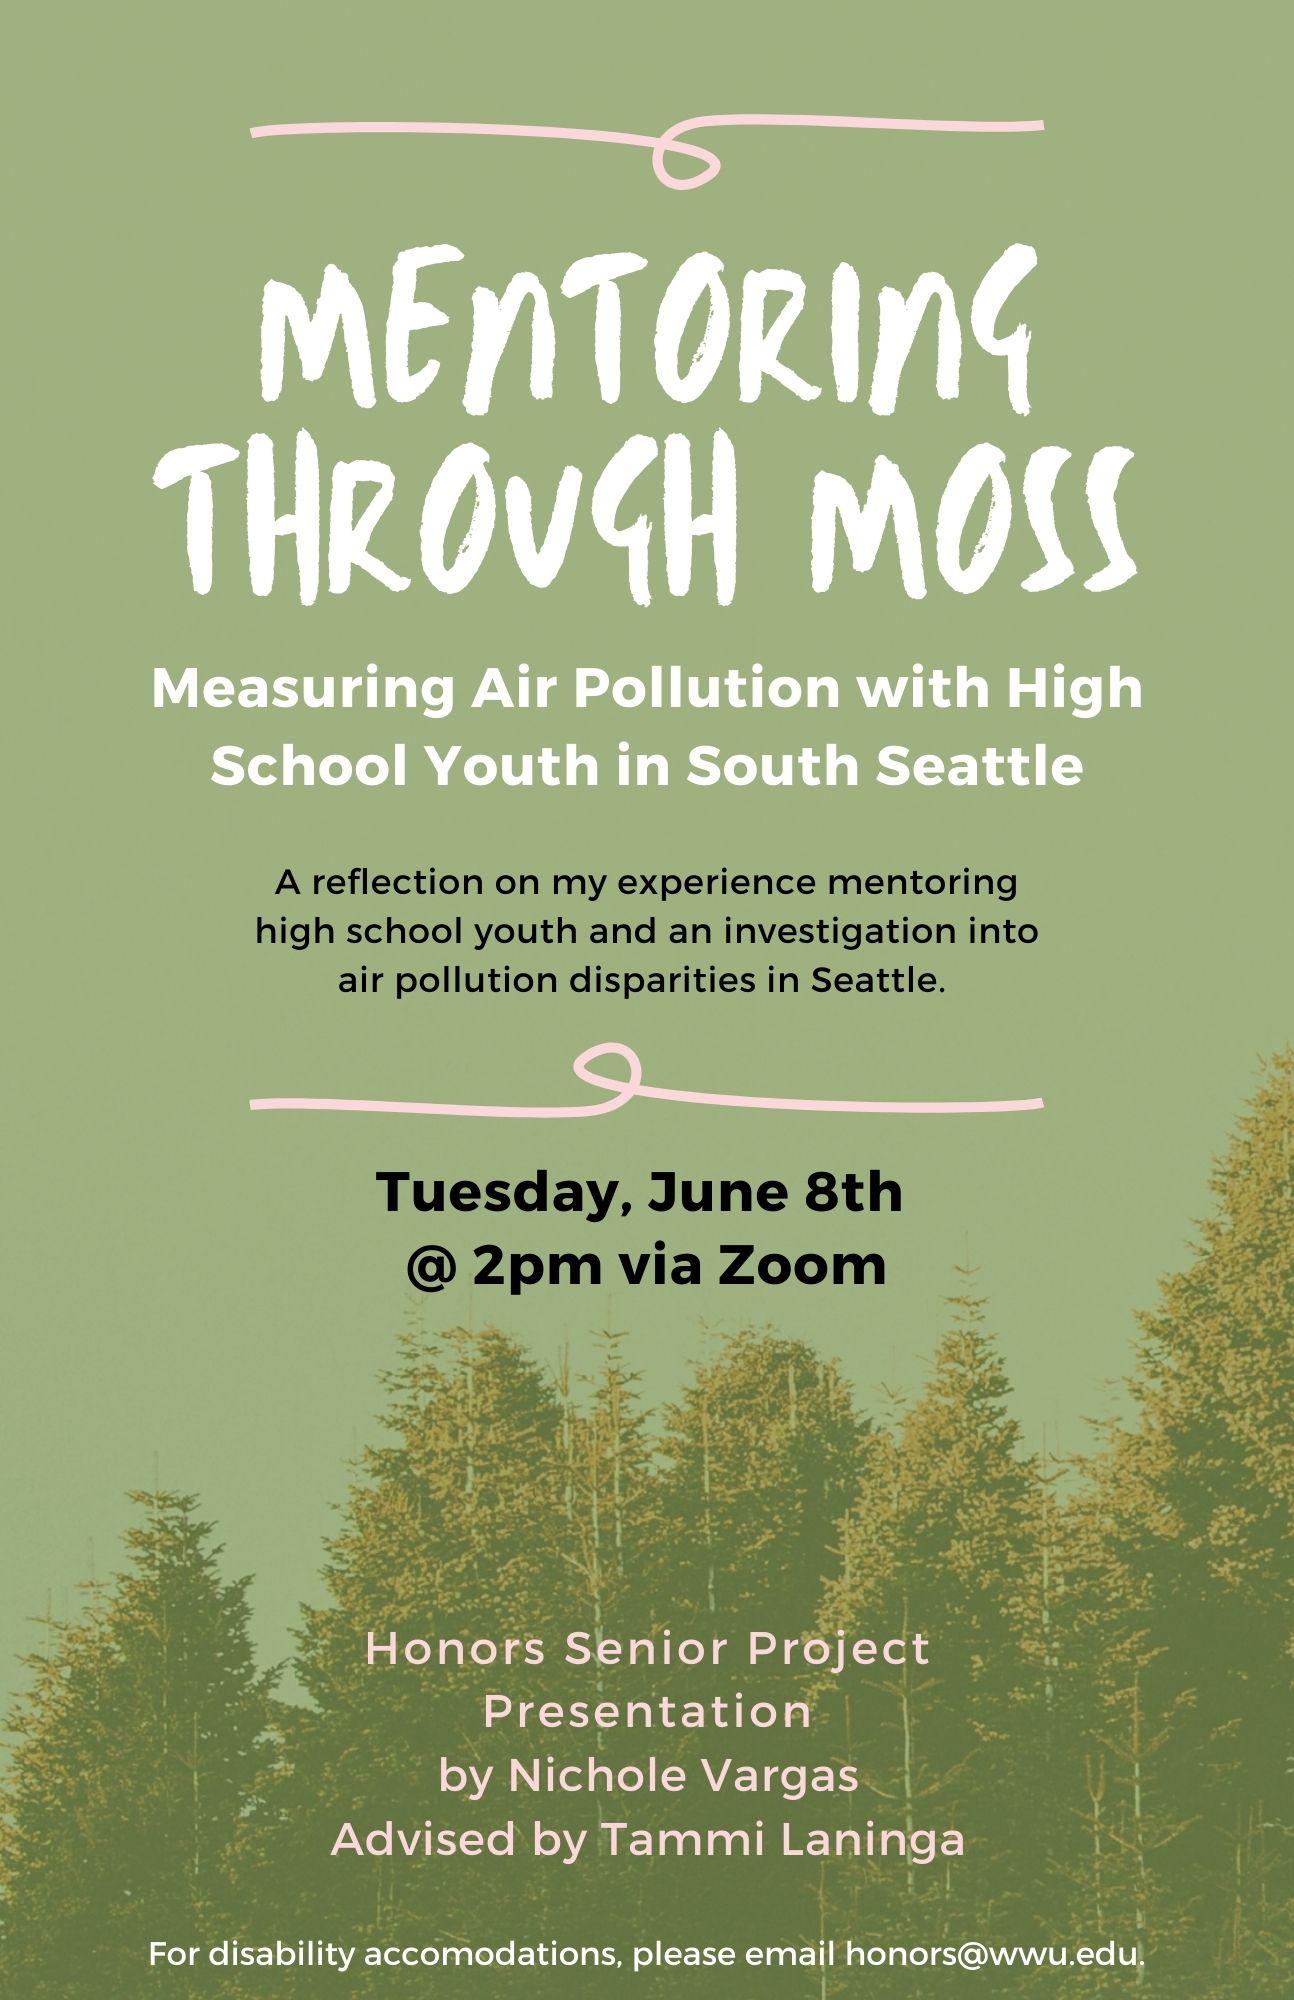 Moss green background with evergreen trees lining the bottom. Text reads: "Mentoring Through Moss: Measuring Air Pollution with High School Youth in South Seattle. A reflection on my experience mentoring high school youth and an investigation into air pollution disparities in Seattle. Tuesday, June 8th @ 2pm via Zoom. Honors Senior Project Presentation by Nichole Vargas, Advised by Tammi Laninga. For disability accommodations, please email honors@wwu.edu."